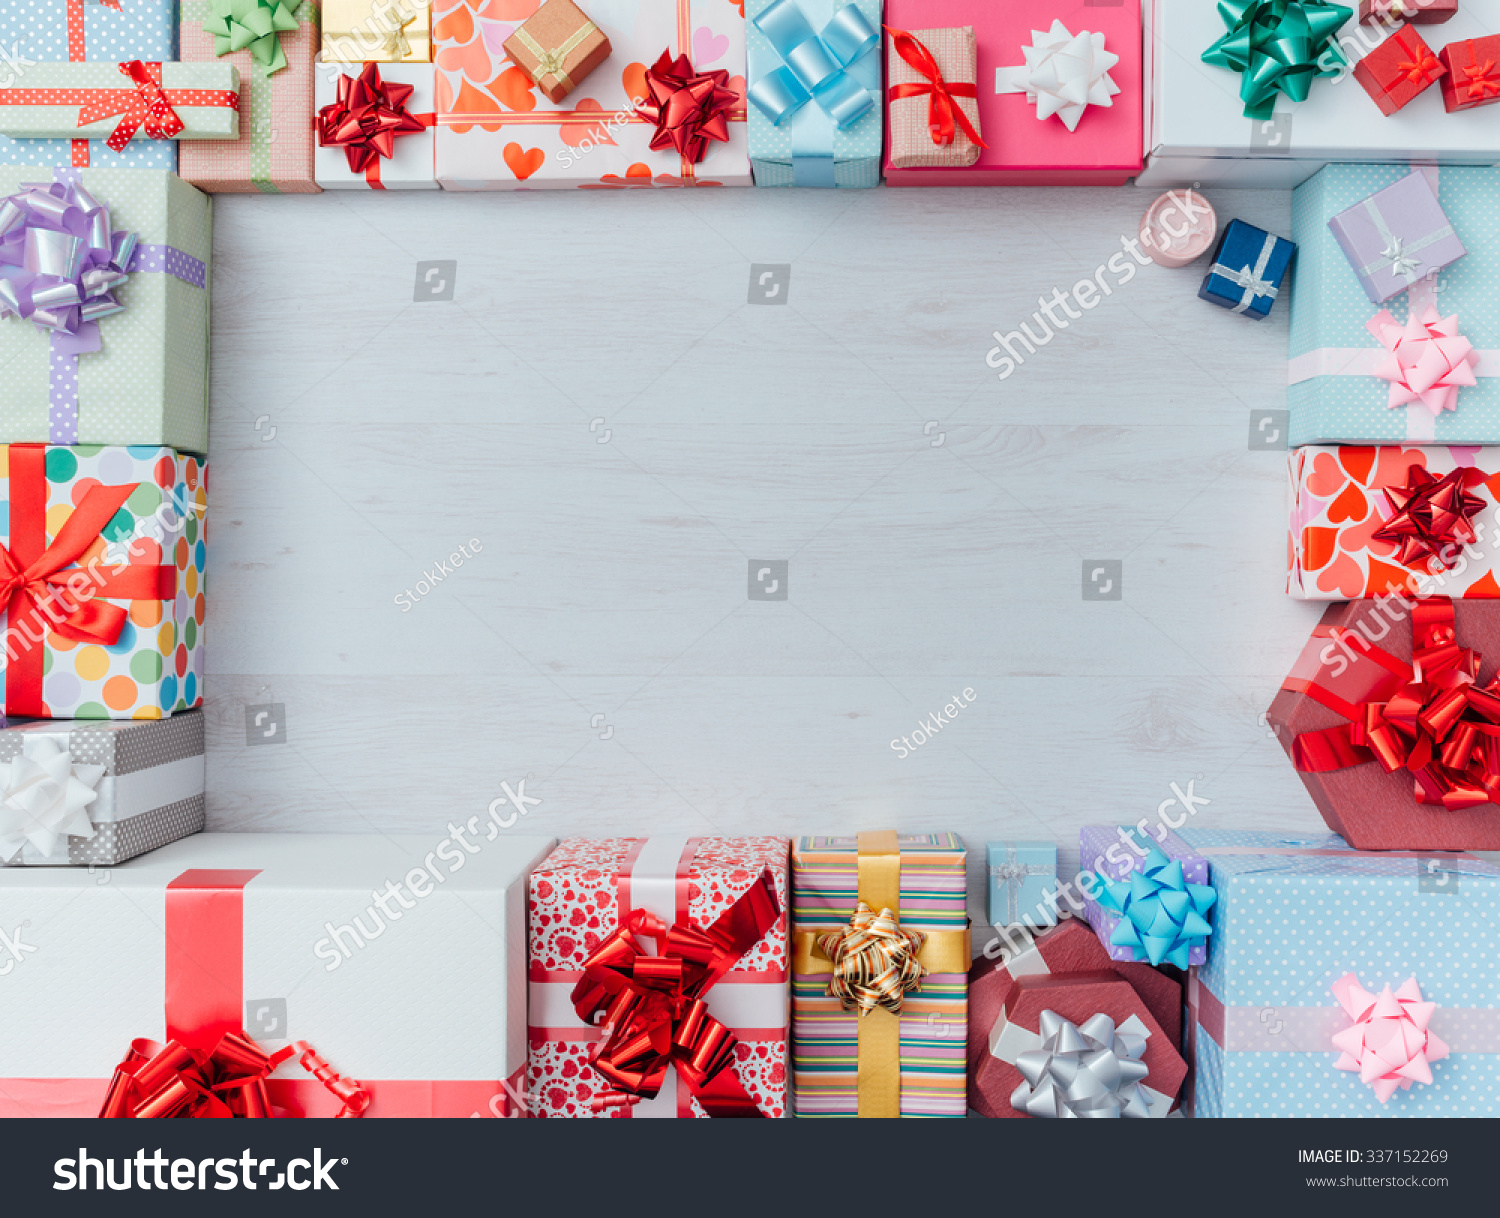 Colorful gift boxes framing a blank copy space on a desktop, top view, Christmas and celebrations concept #337152269